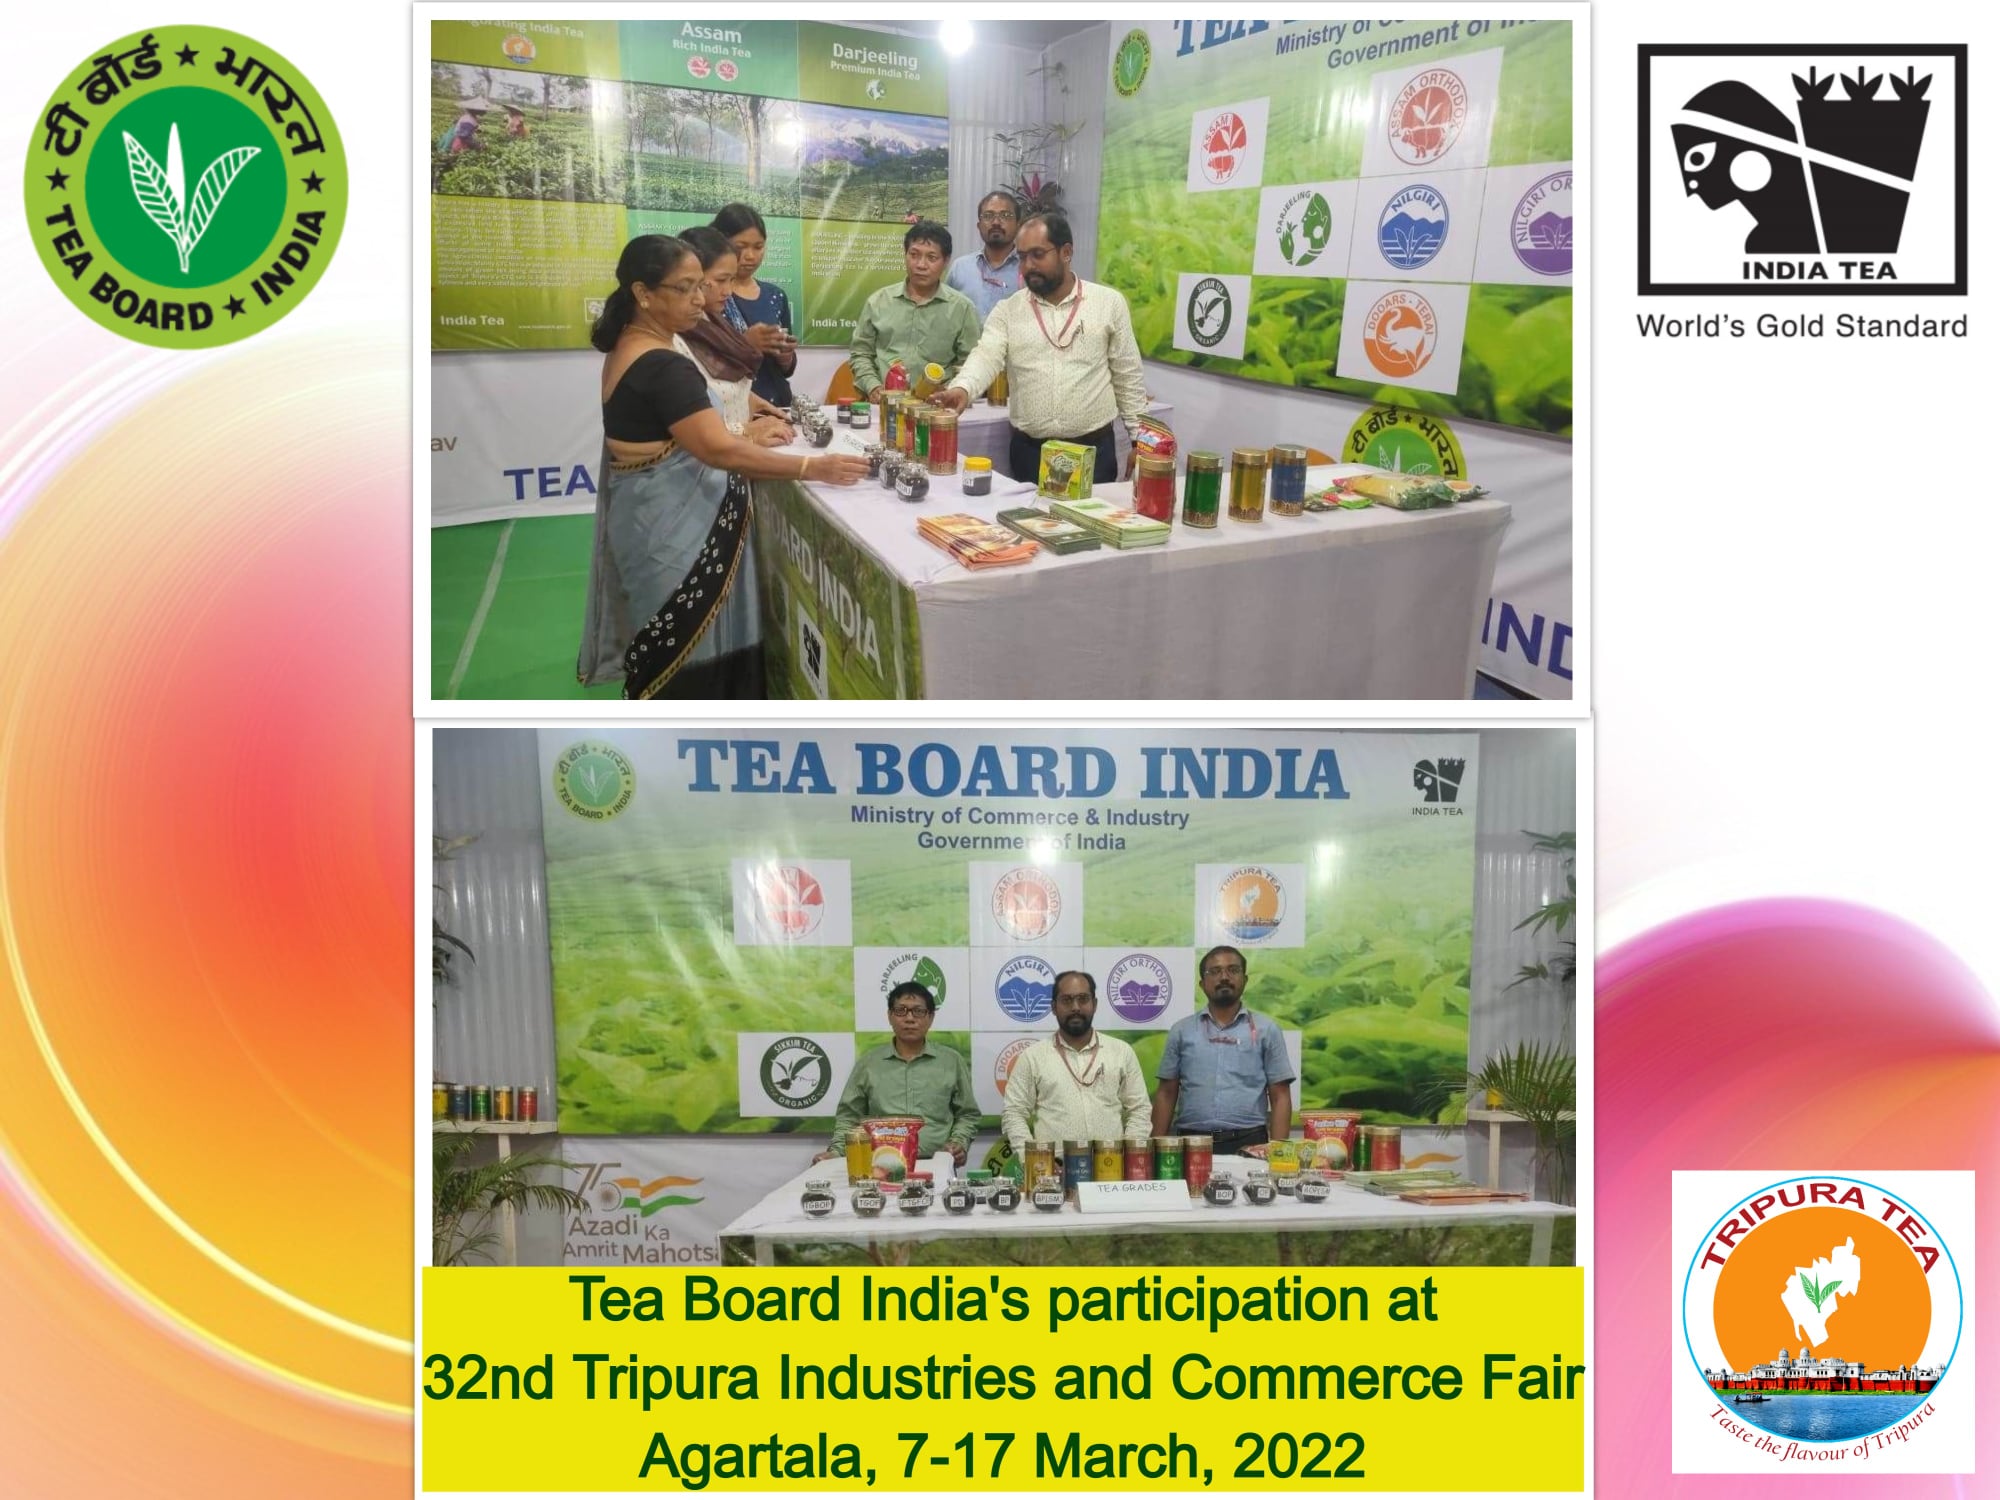 Tea Board India's participation at 32nd Tripura Industries and Commerce Fair, Agartala, 7th to 17th March 2022